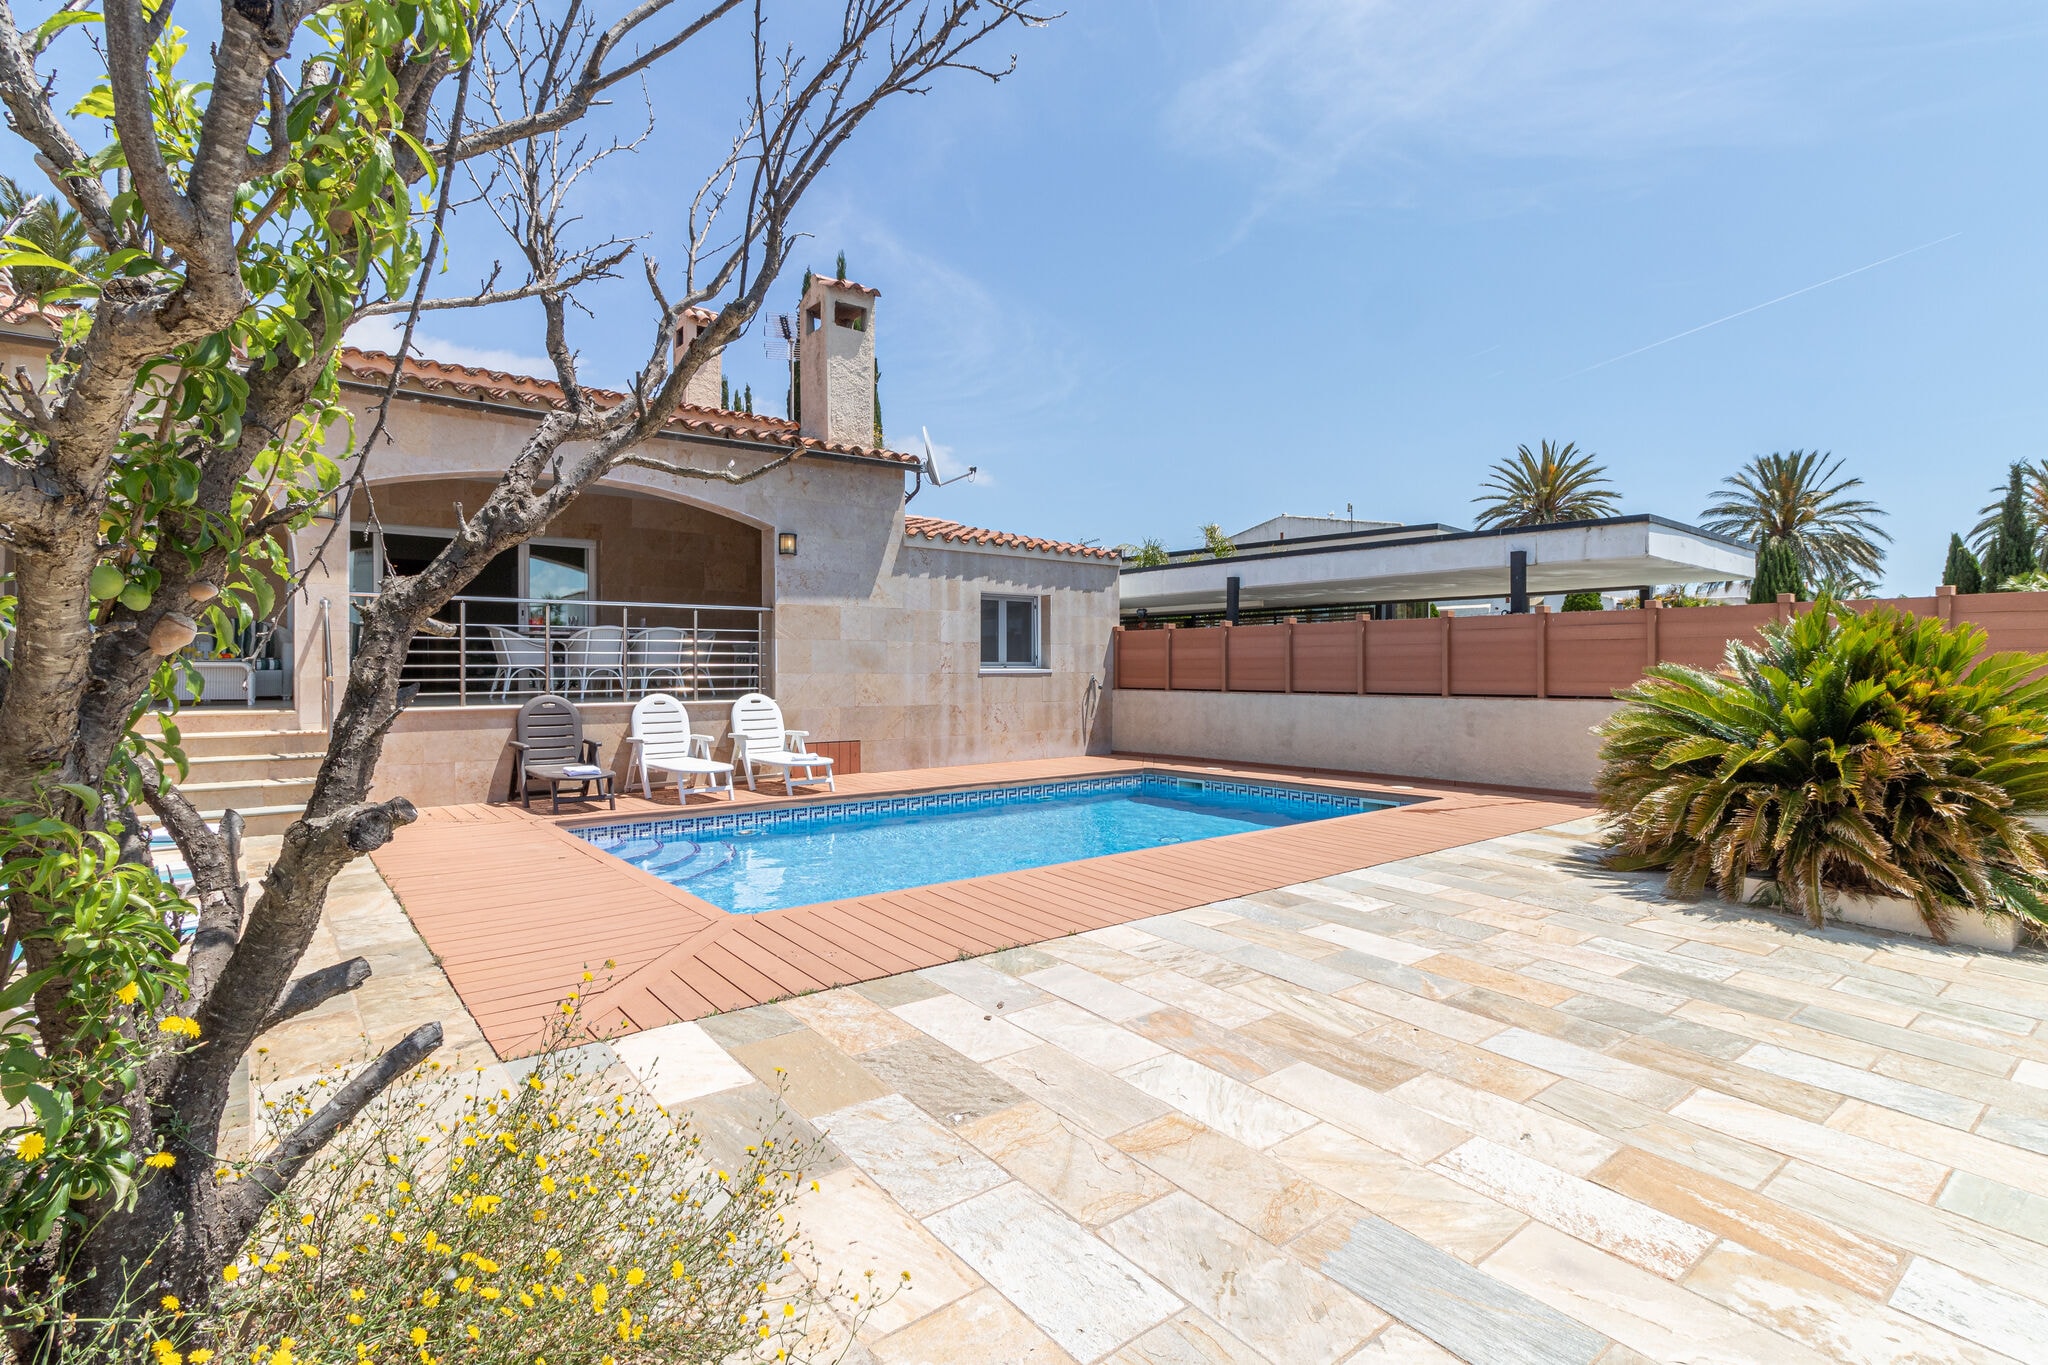 4 bedroom villa with pool in the channel of Empuriabrava